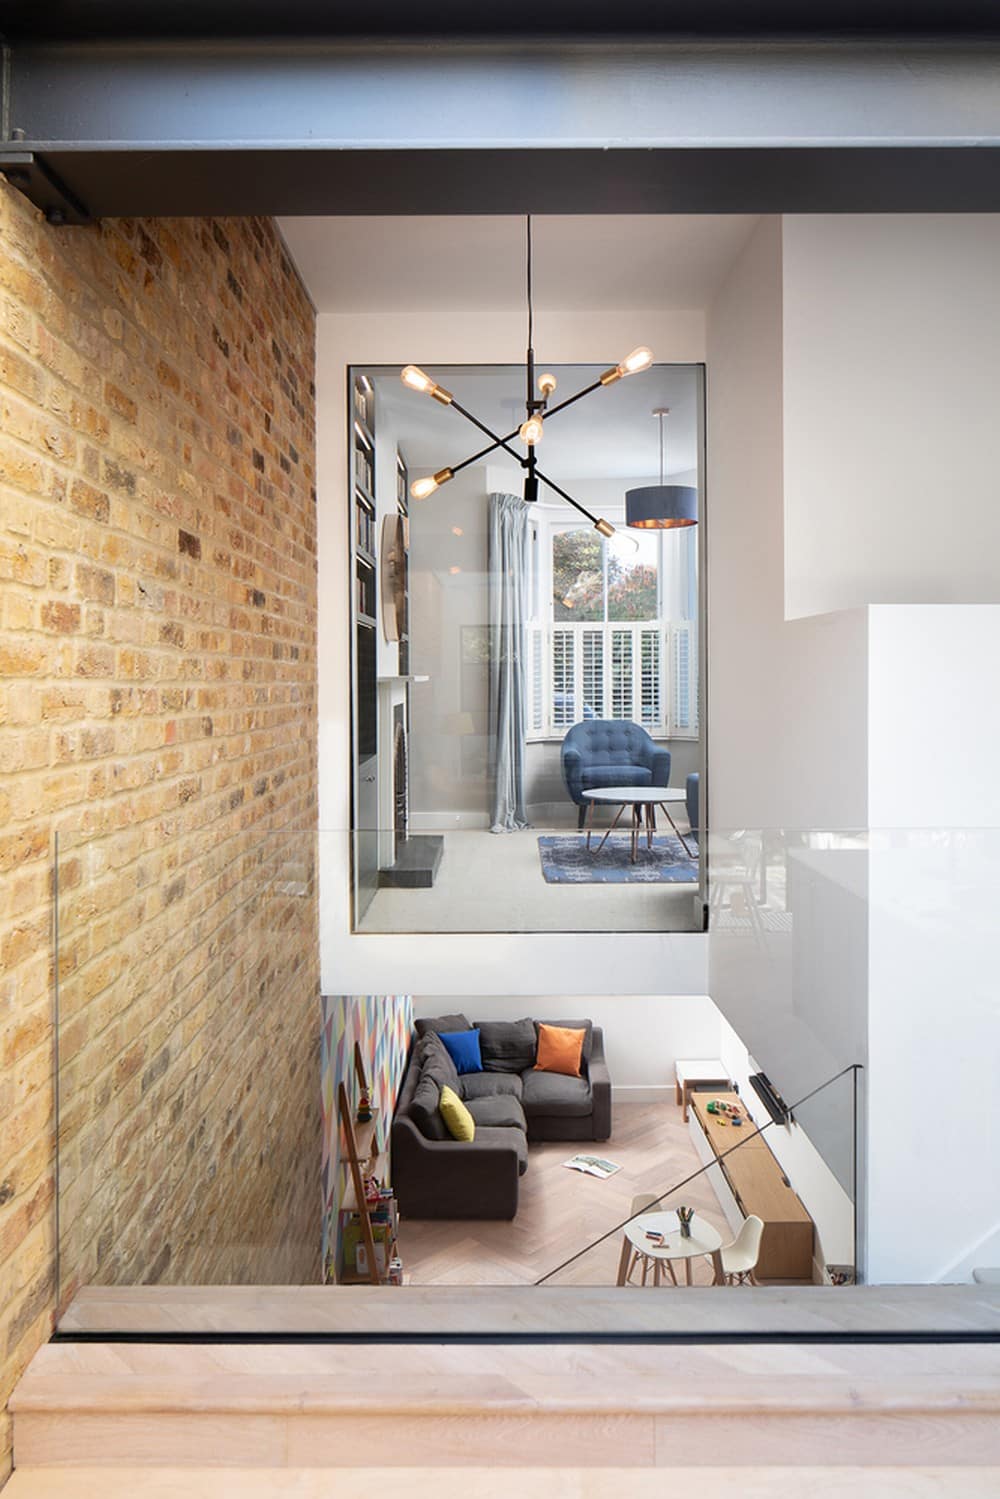 Chivalry Road Terraced House,London / Sketch Architects